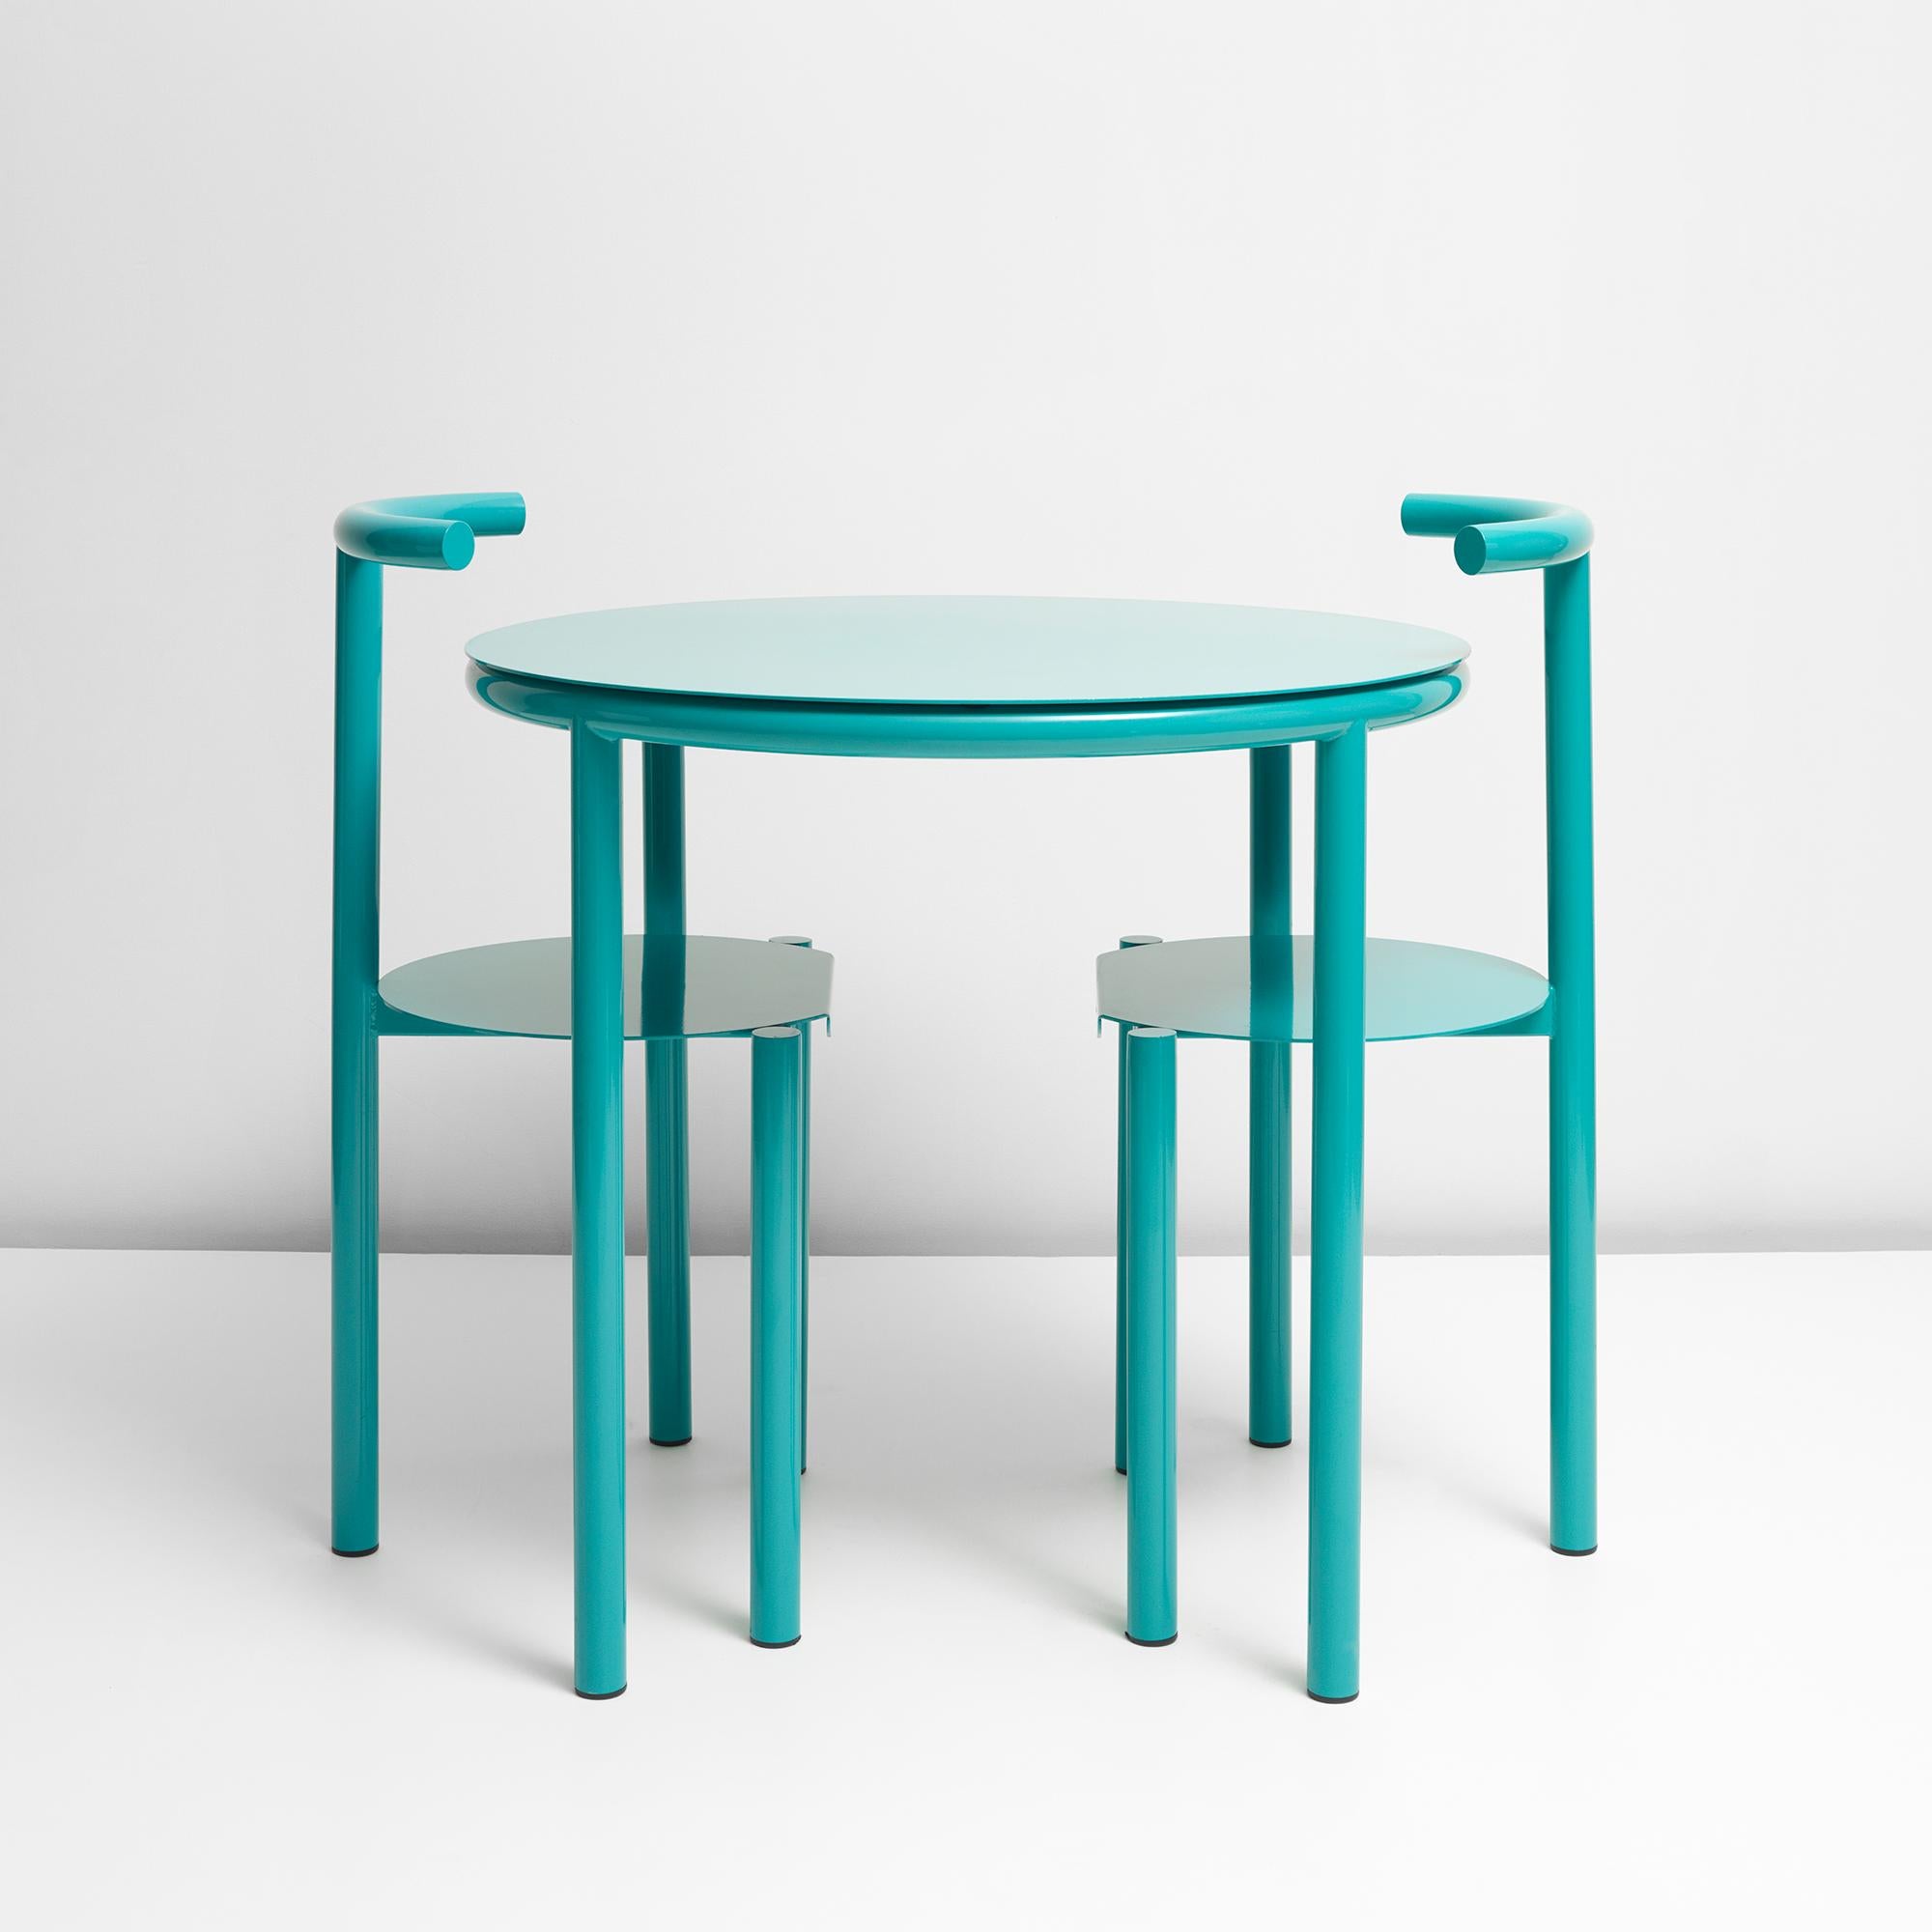 A cafe table originally designed to partner with the B Series chair.

The B - Series takes the graphical shapes found in the urban environment and reimagines them in to a bold statement pieces. With both post-modernist and modernist influences